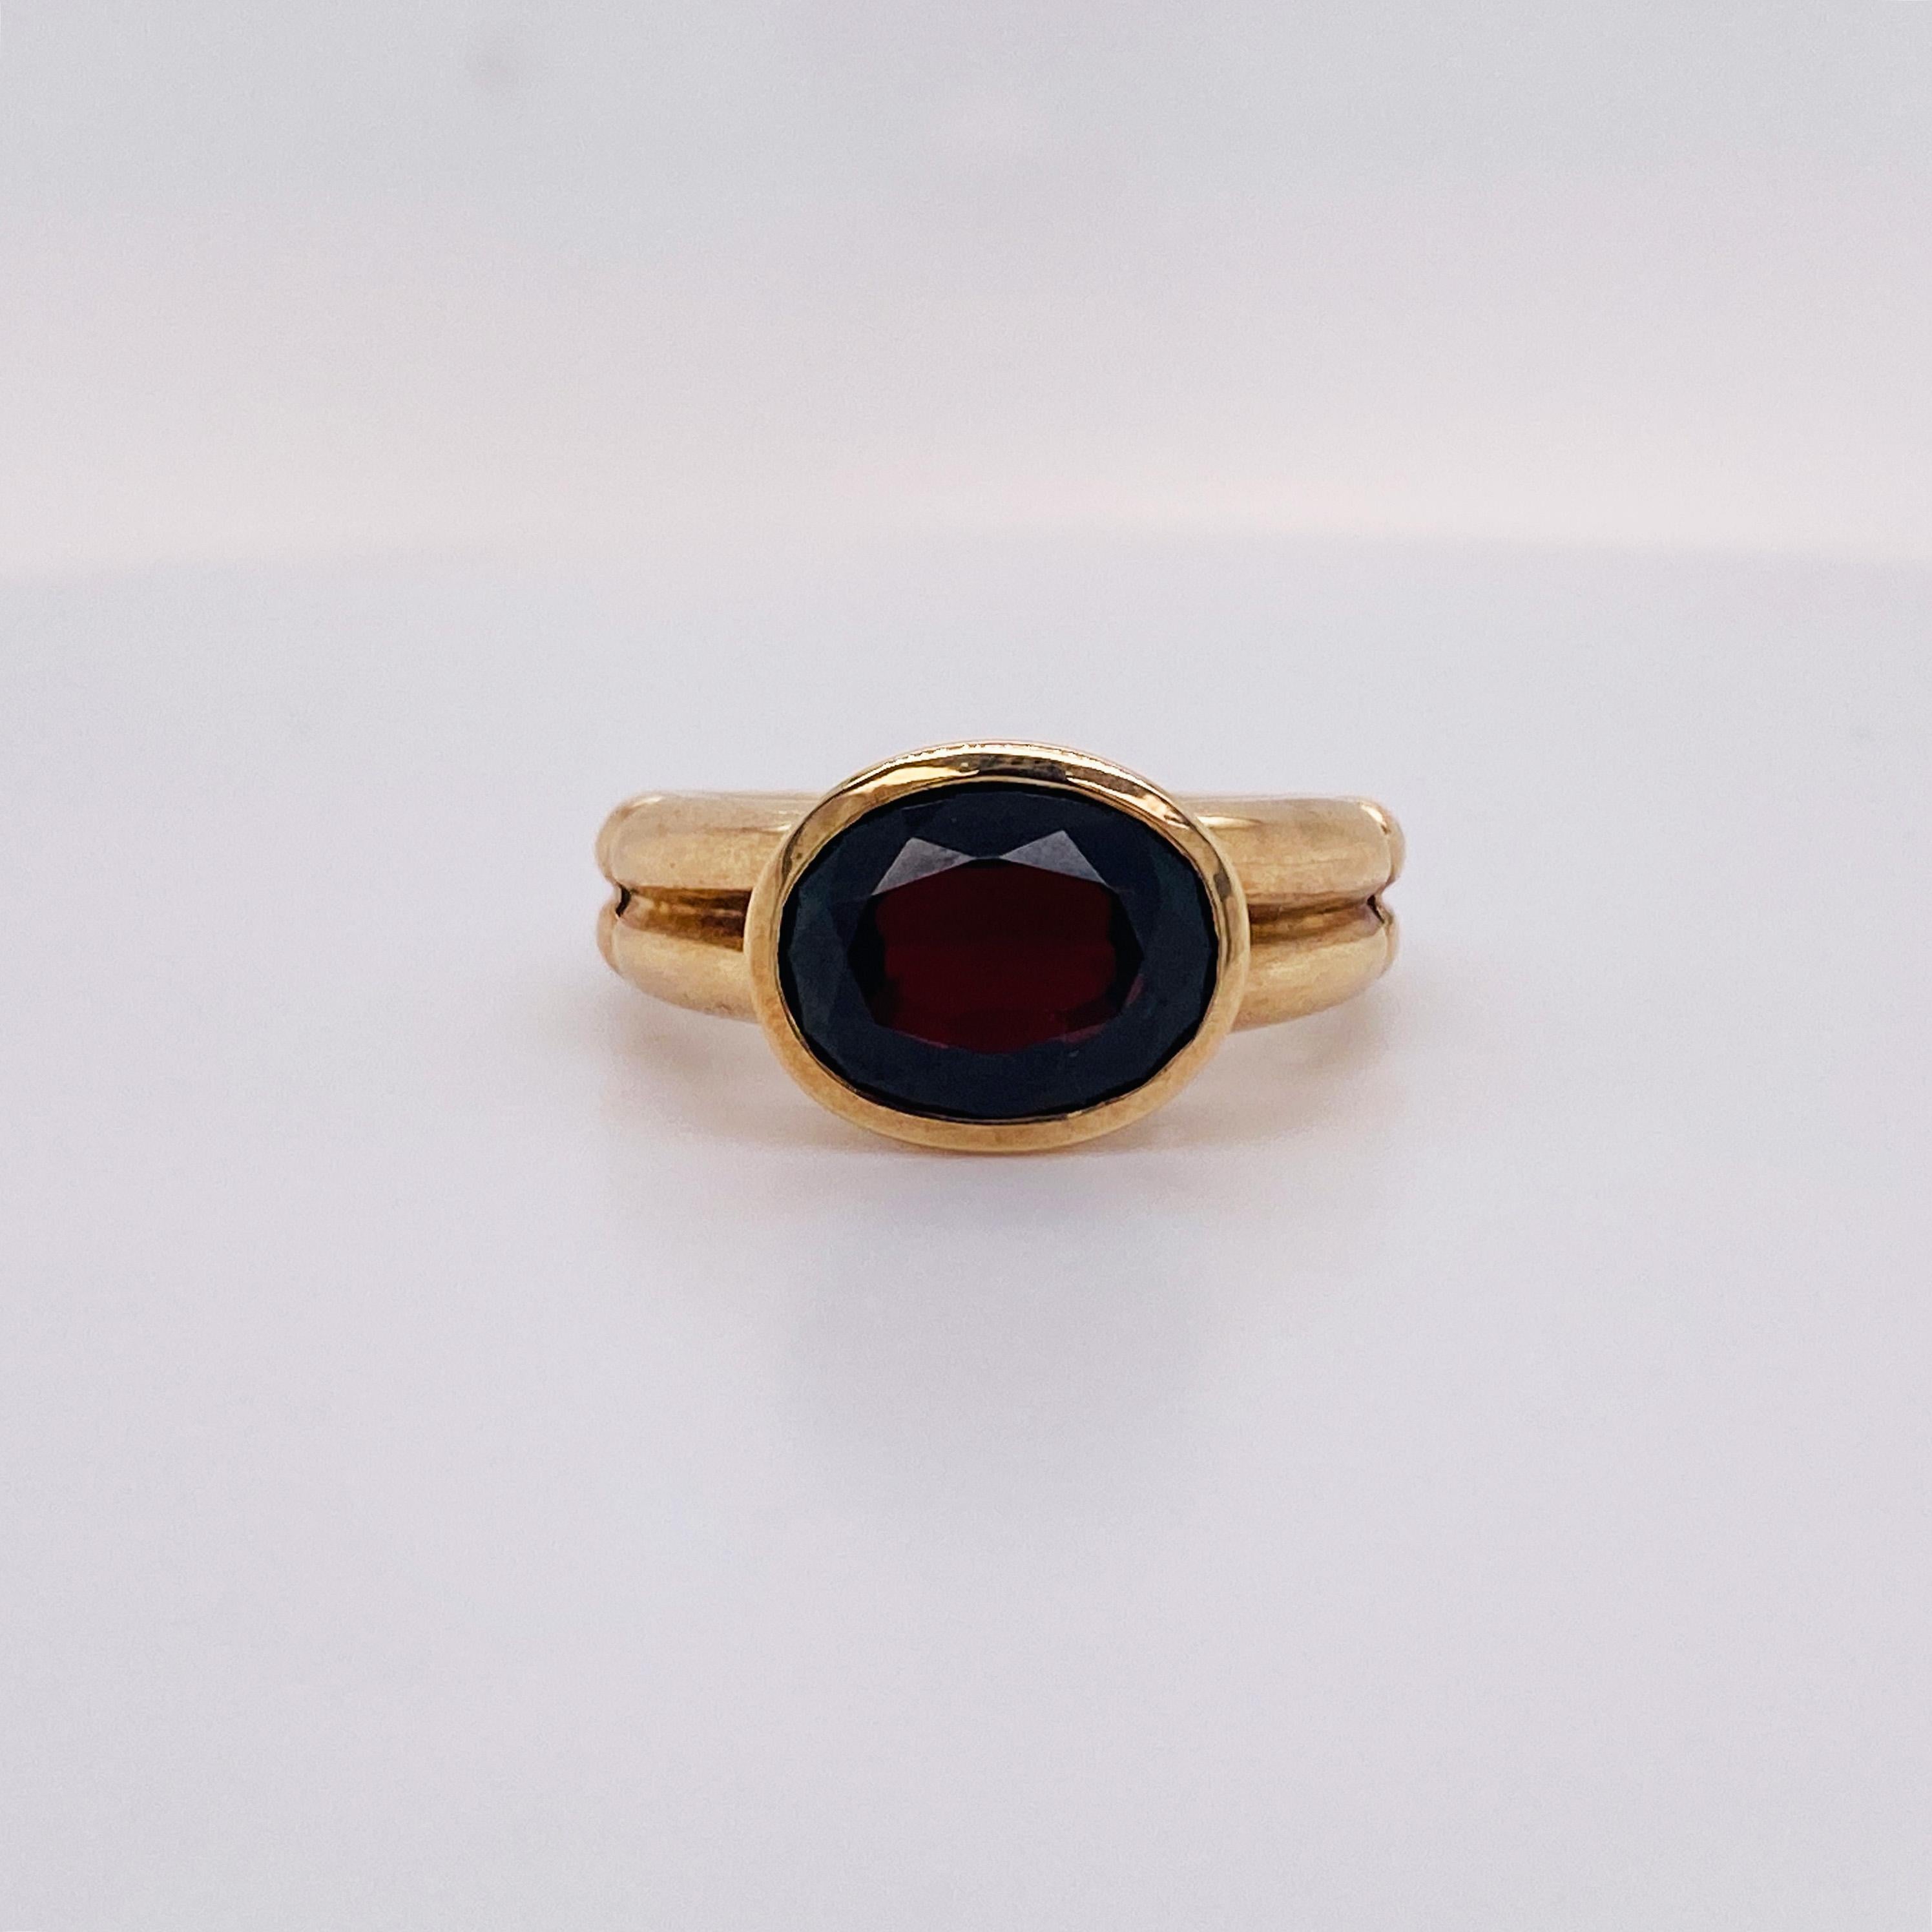 This modern bezel-set garnet is 3.10 carat oval shape and has a fabulous, structured design. The ring is solid 14 karat gold with a unique ribbed band This ring looks lovely on anyone’s hand as the band tapers and wears very comfortably! This